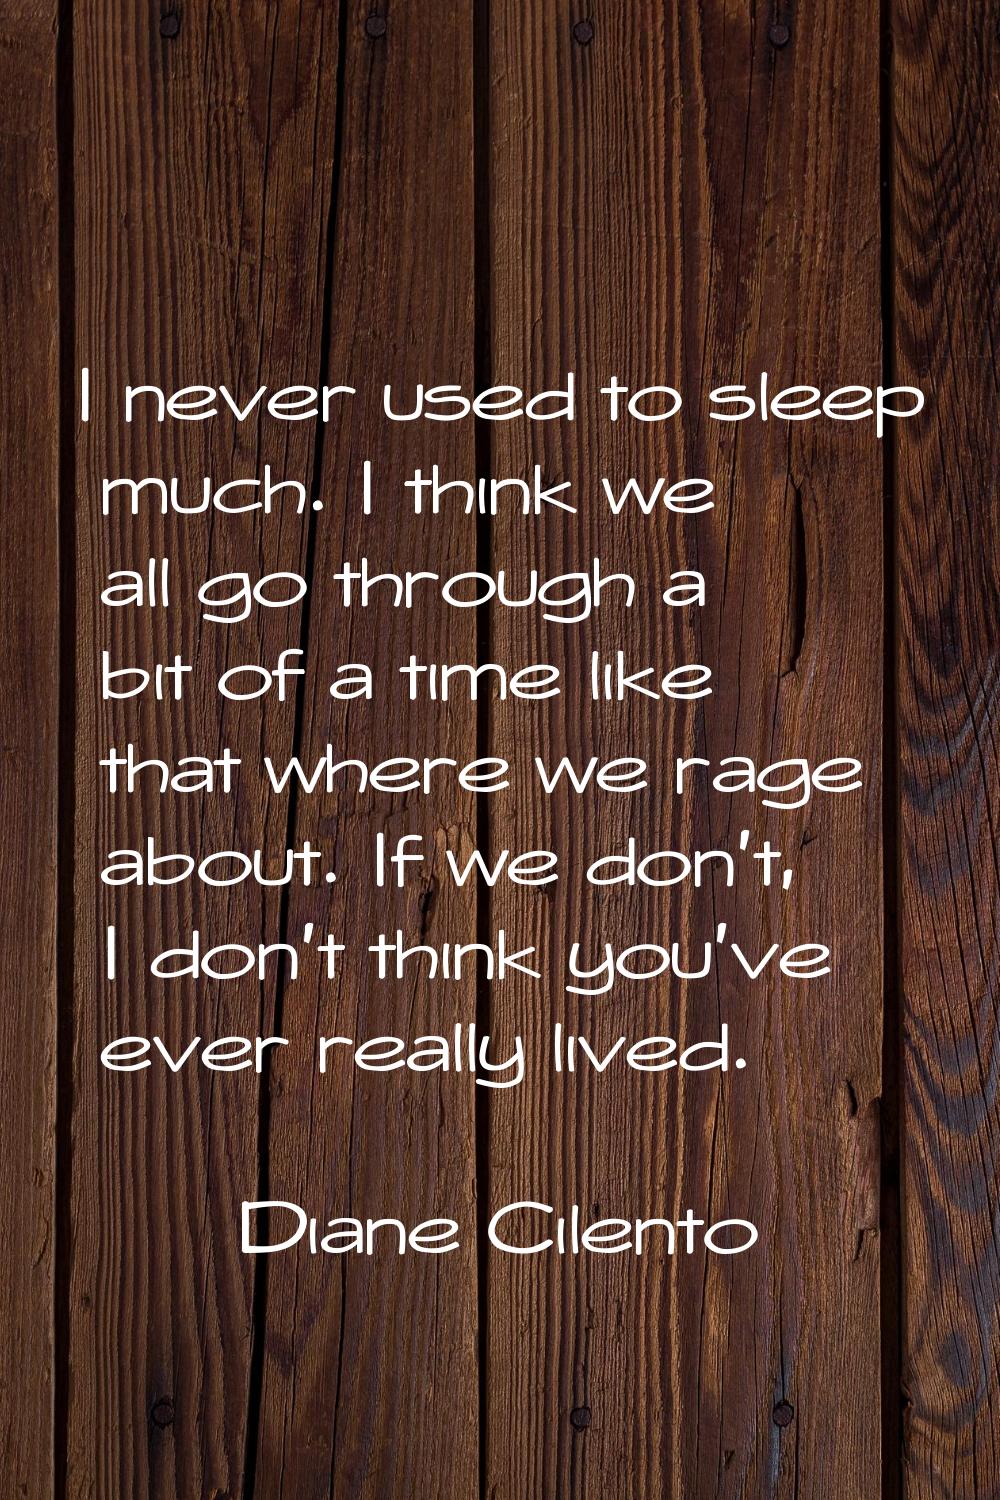 I never used to sleep much. I think we all go through a bit of a time like that where we rage about